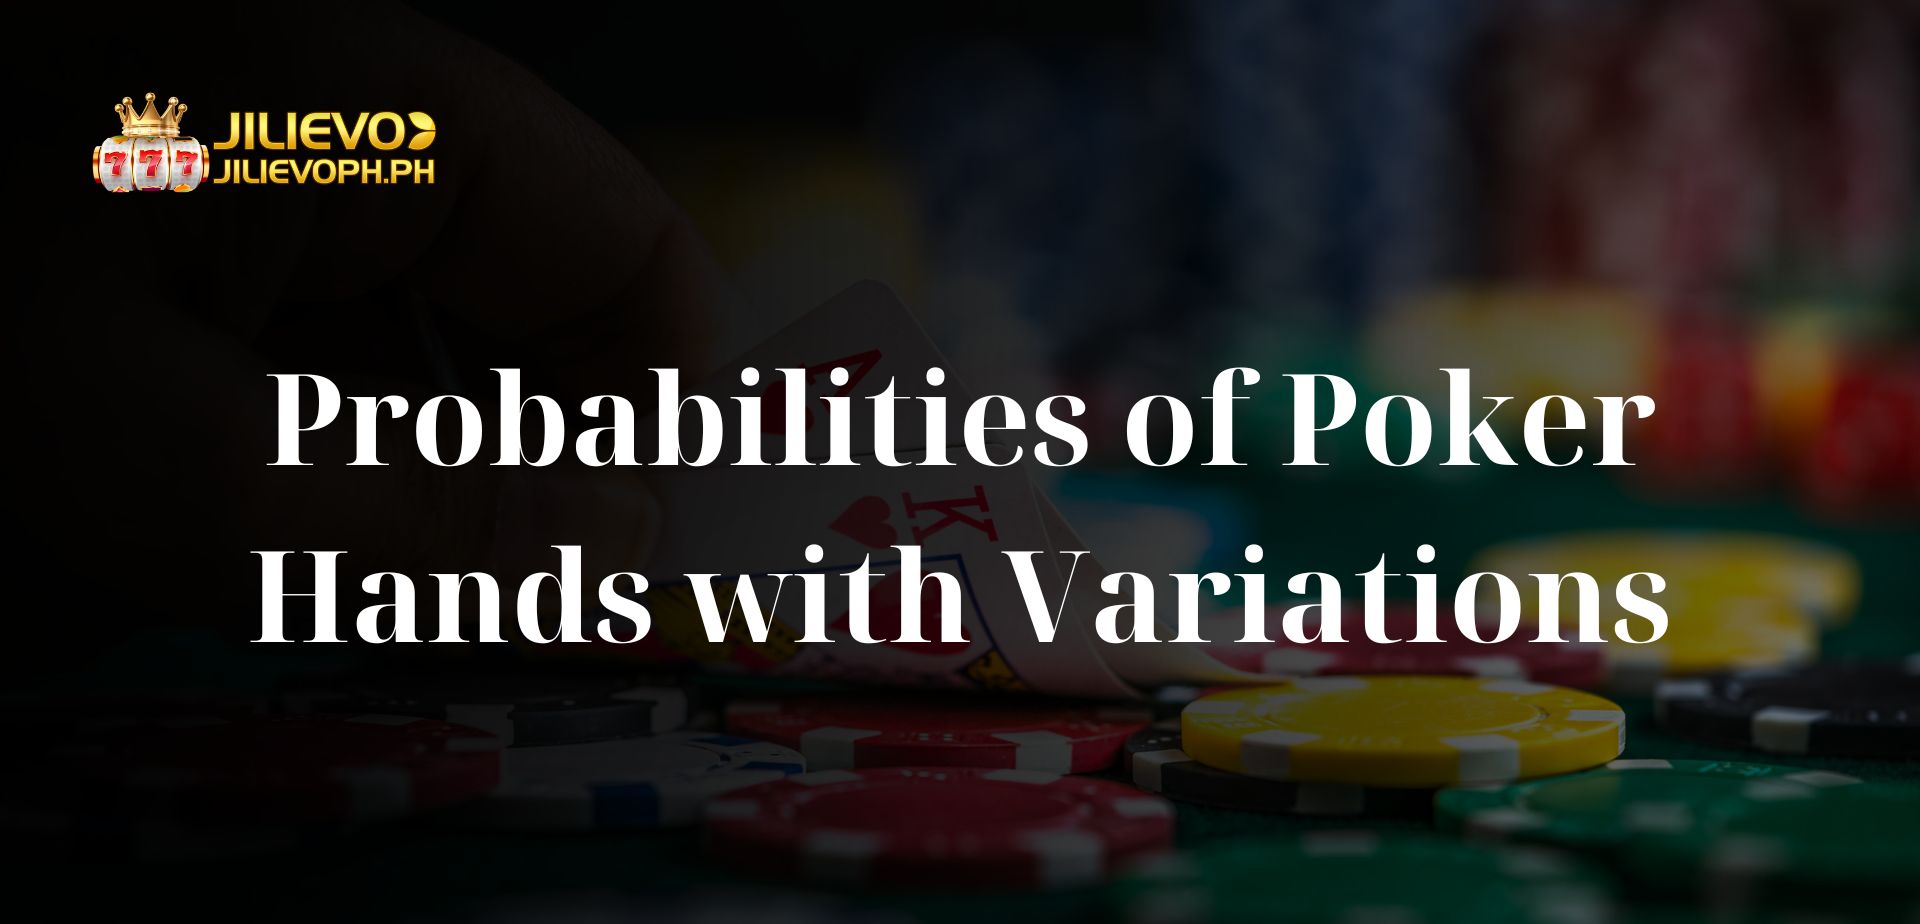 Probabilities of Poker Hands with Variations